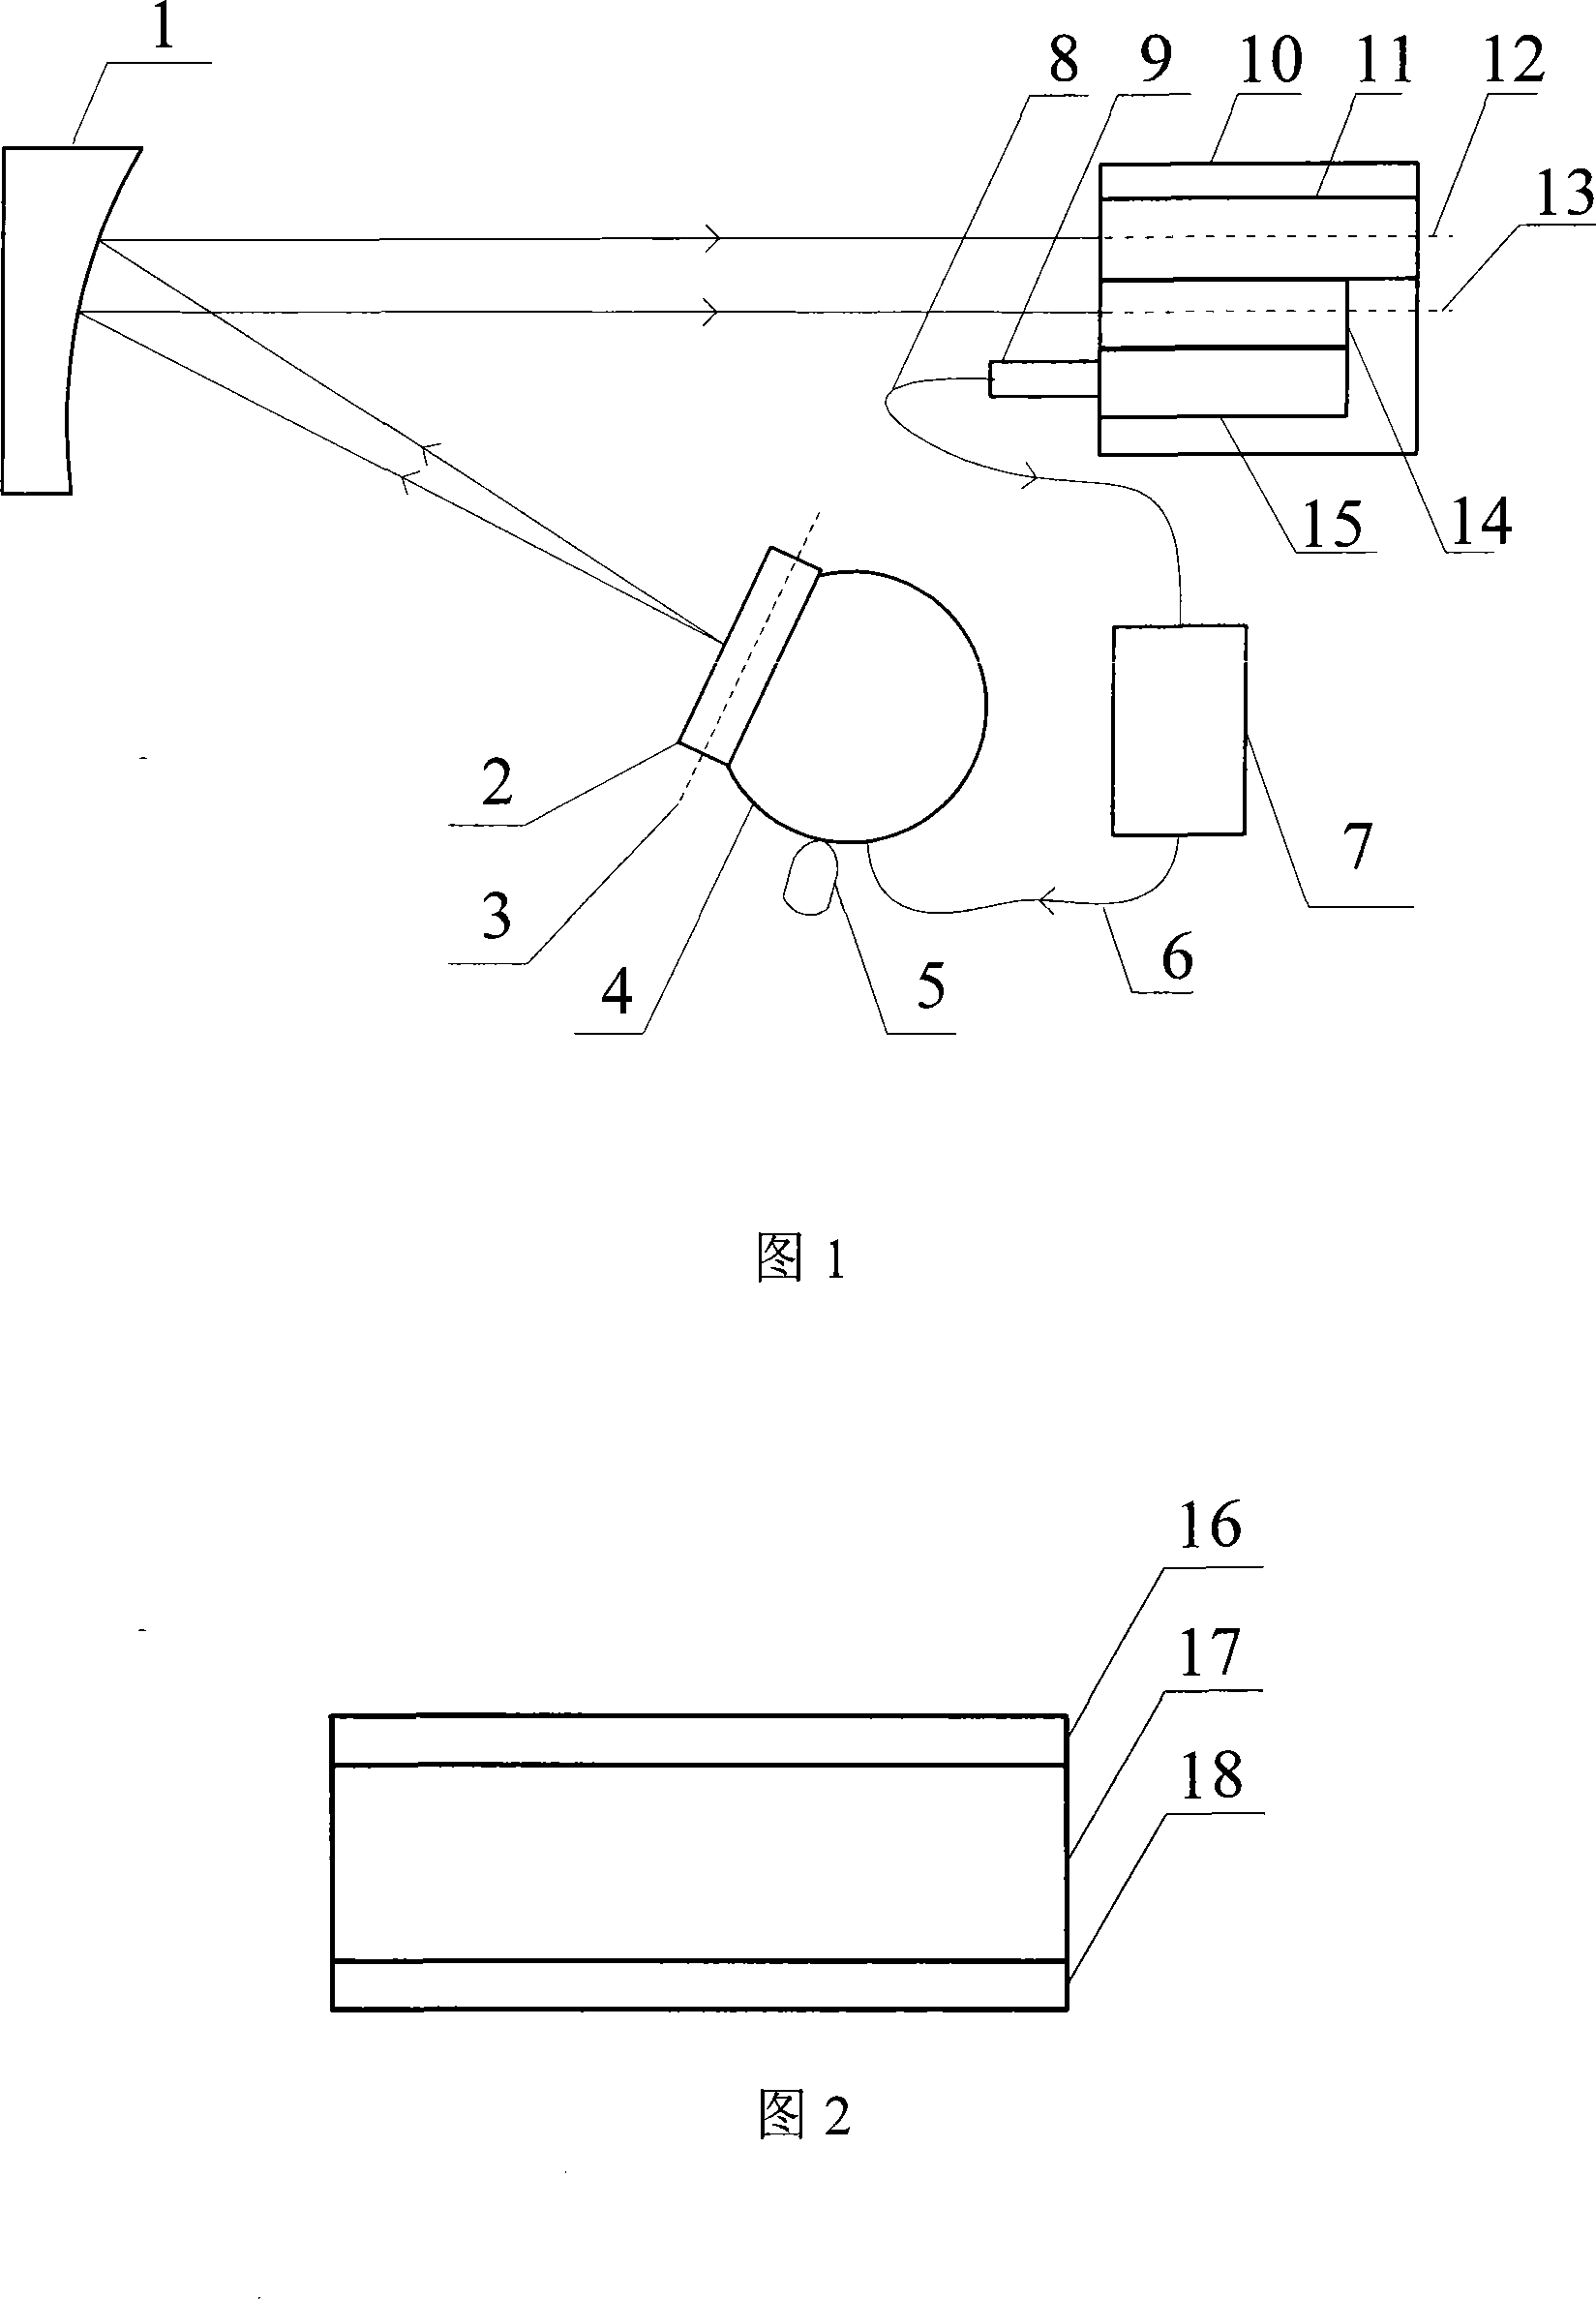 Apparatus for measuring parallelism of laser rangefinder sighting and receiving axes based on liquid crystal modulation